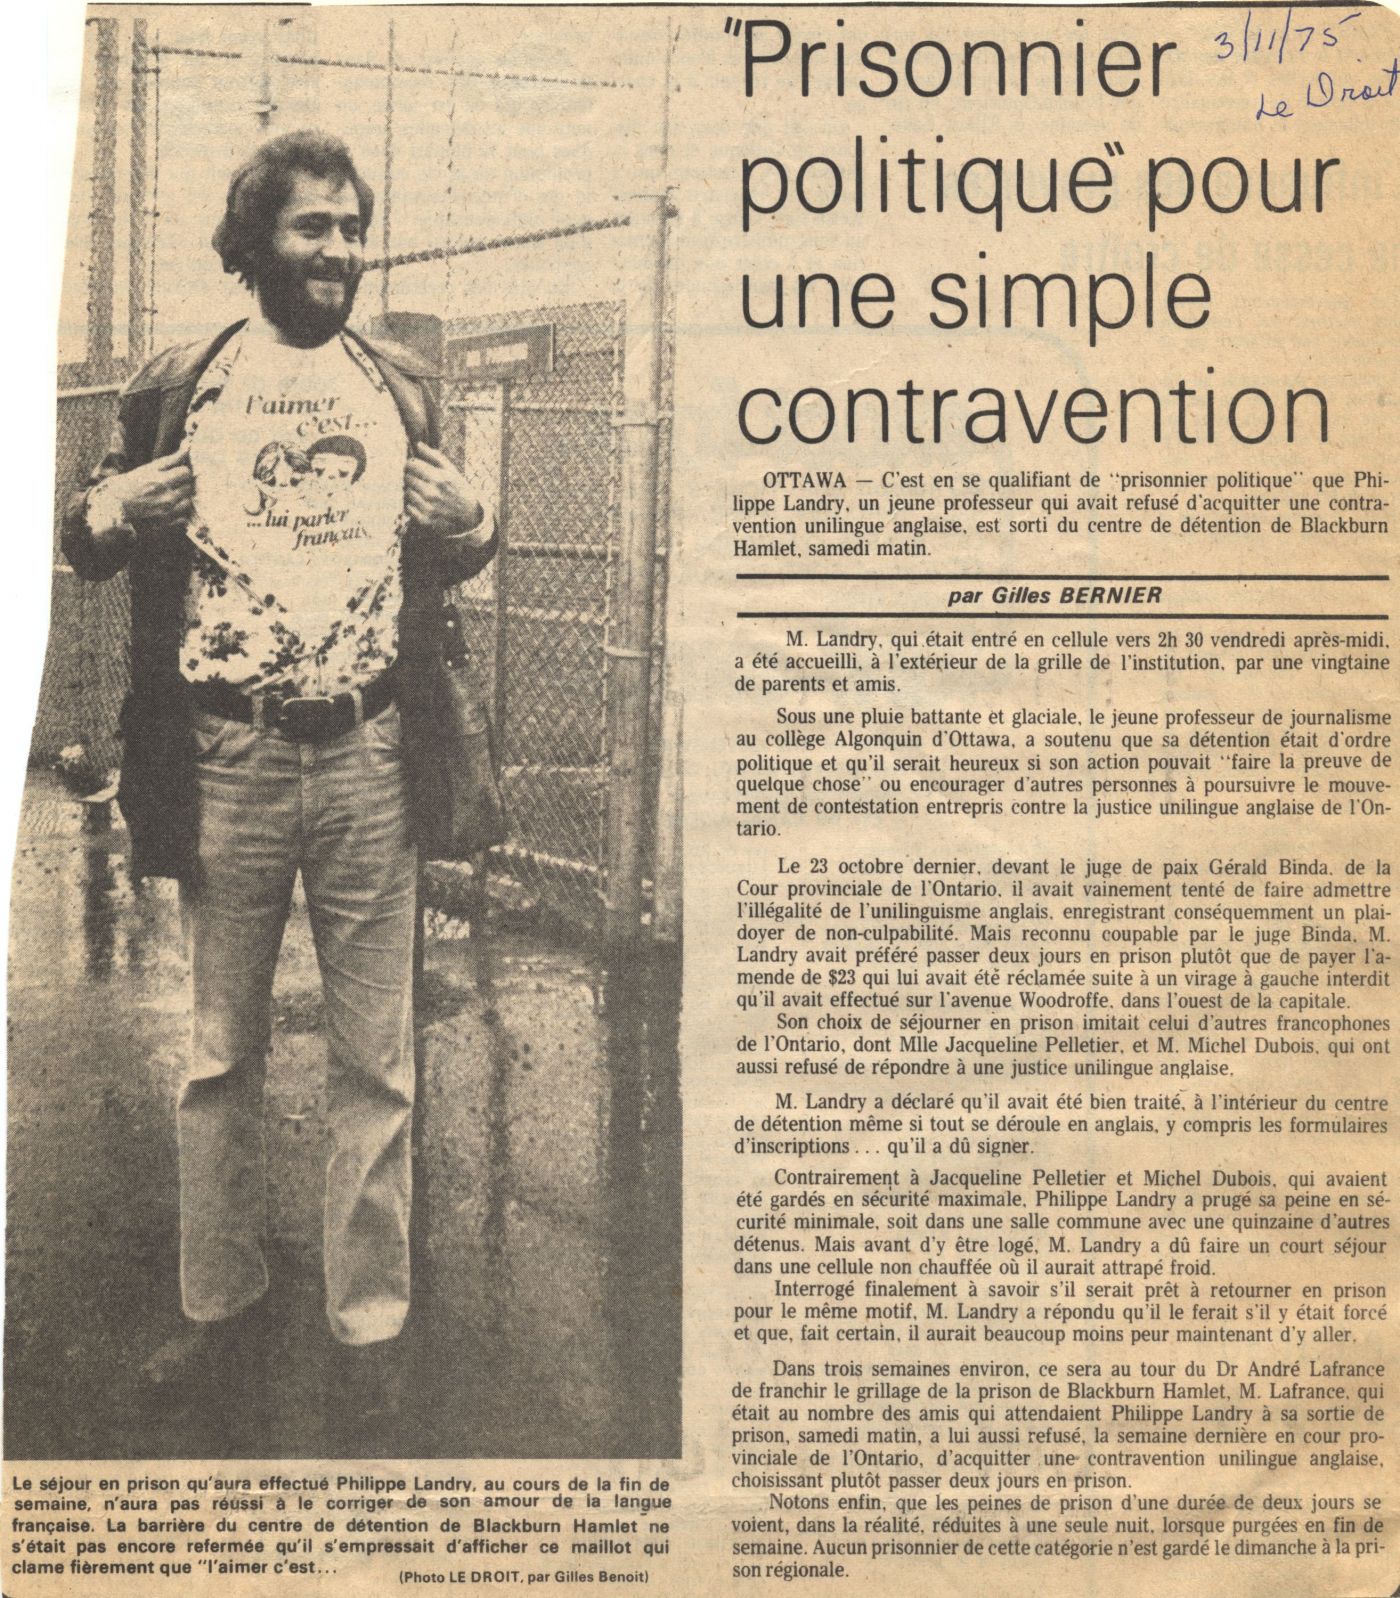 Newspaper article written in French, with the source and date handwritten in blue ink. The article is accompanied by a black and white photograph of a young bearded man revealing a T-shirt with the words “L’aimer c’est… lui parler français” (Love is ... speaking to them in French). In the background, a chain link fence.